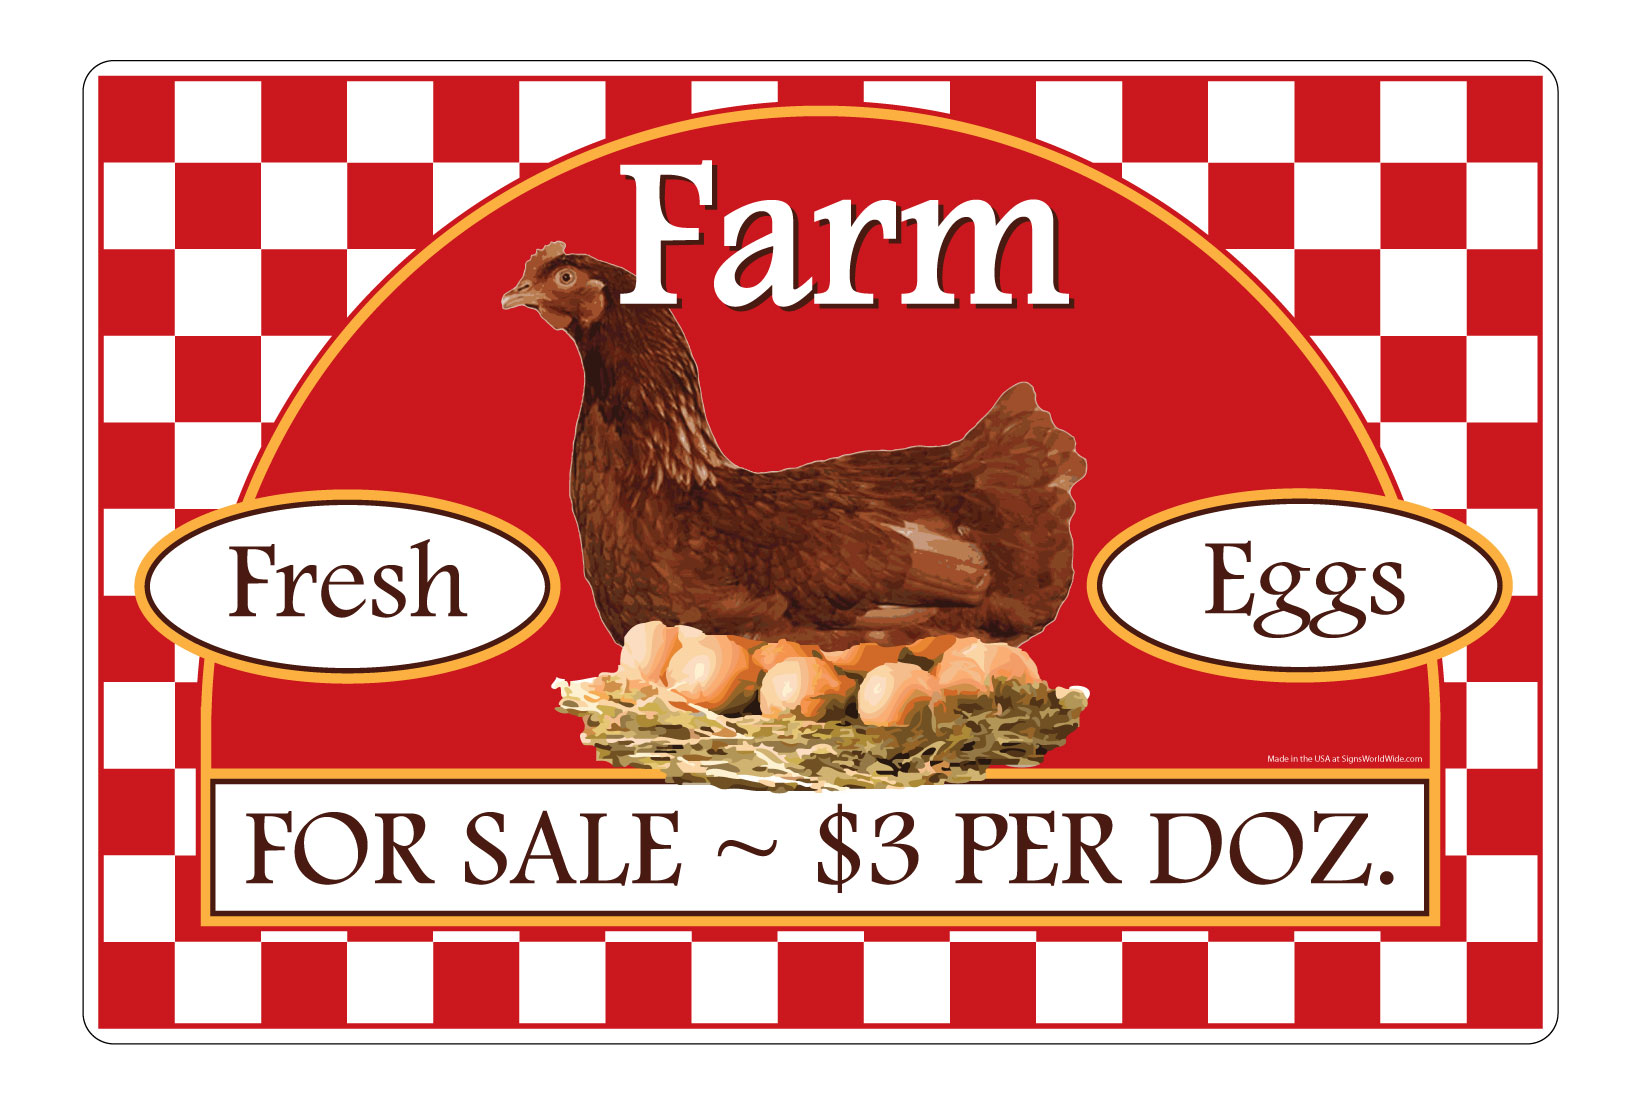 12 x 18 inch Aluminum Sign PREMIUM Personalized Farm Fresh Eggs for Sale Sign with Your Custom Message